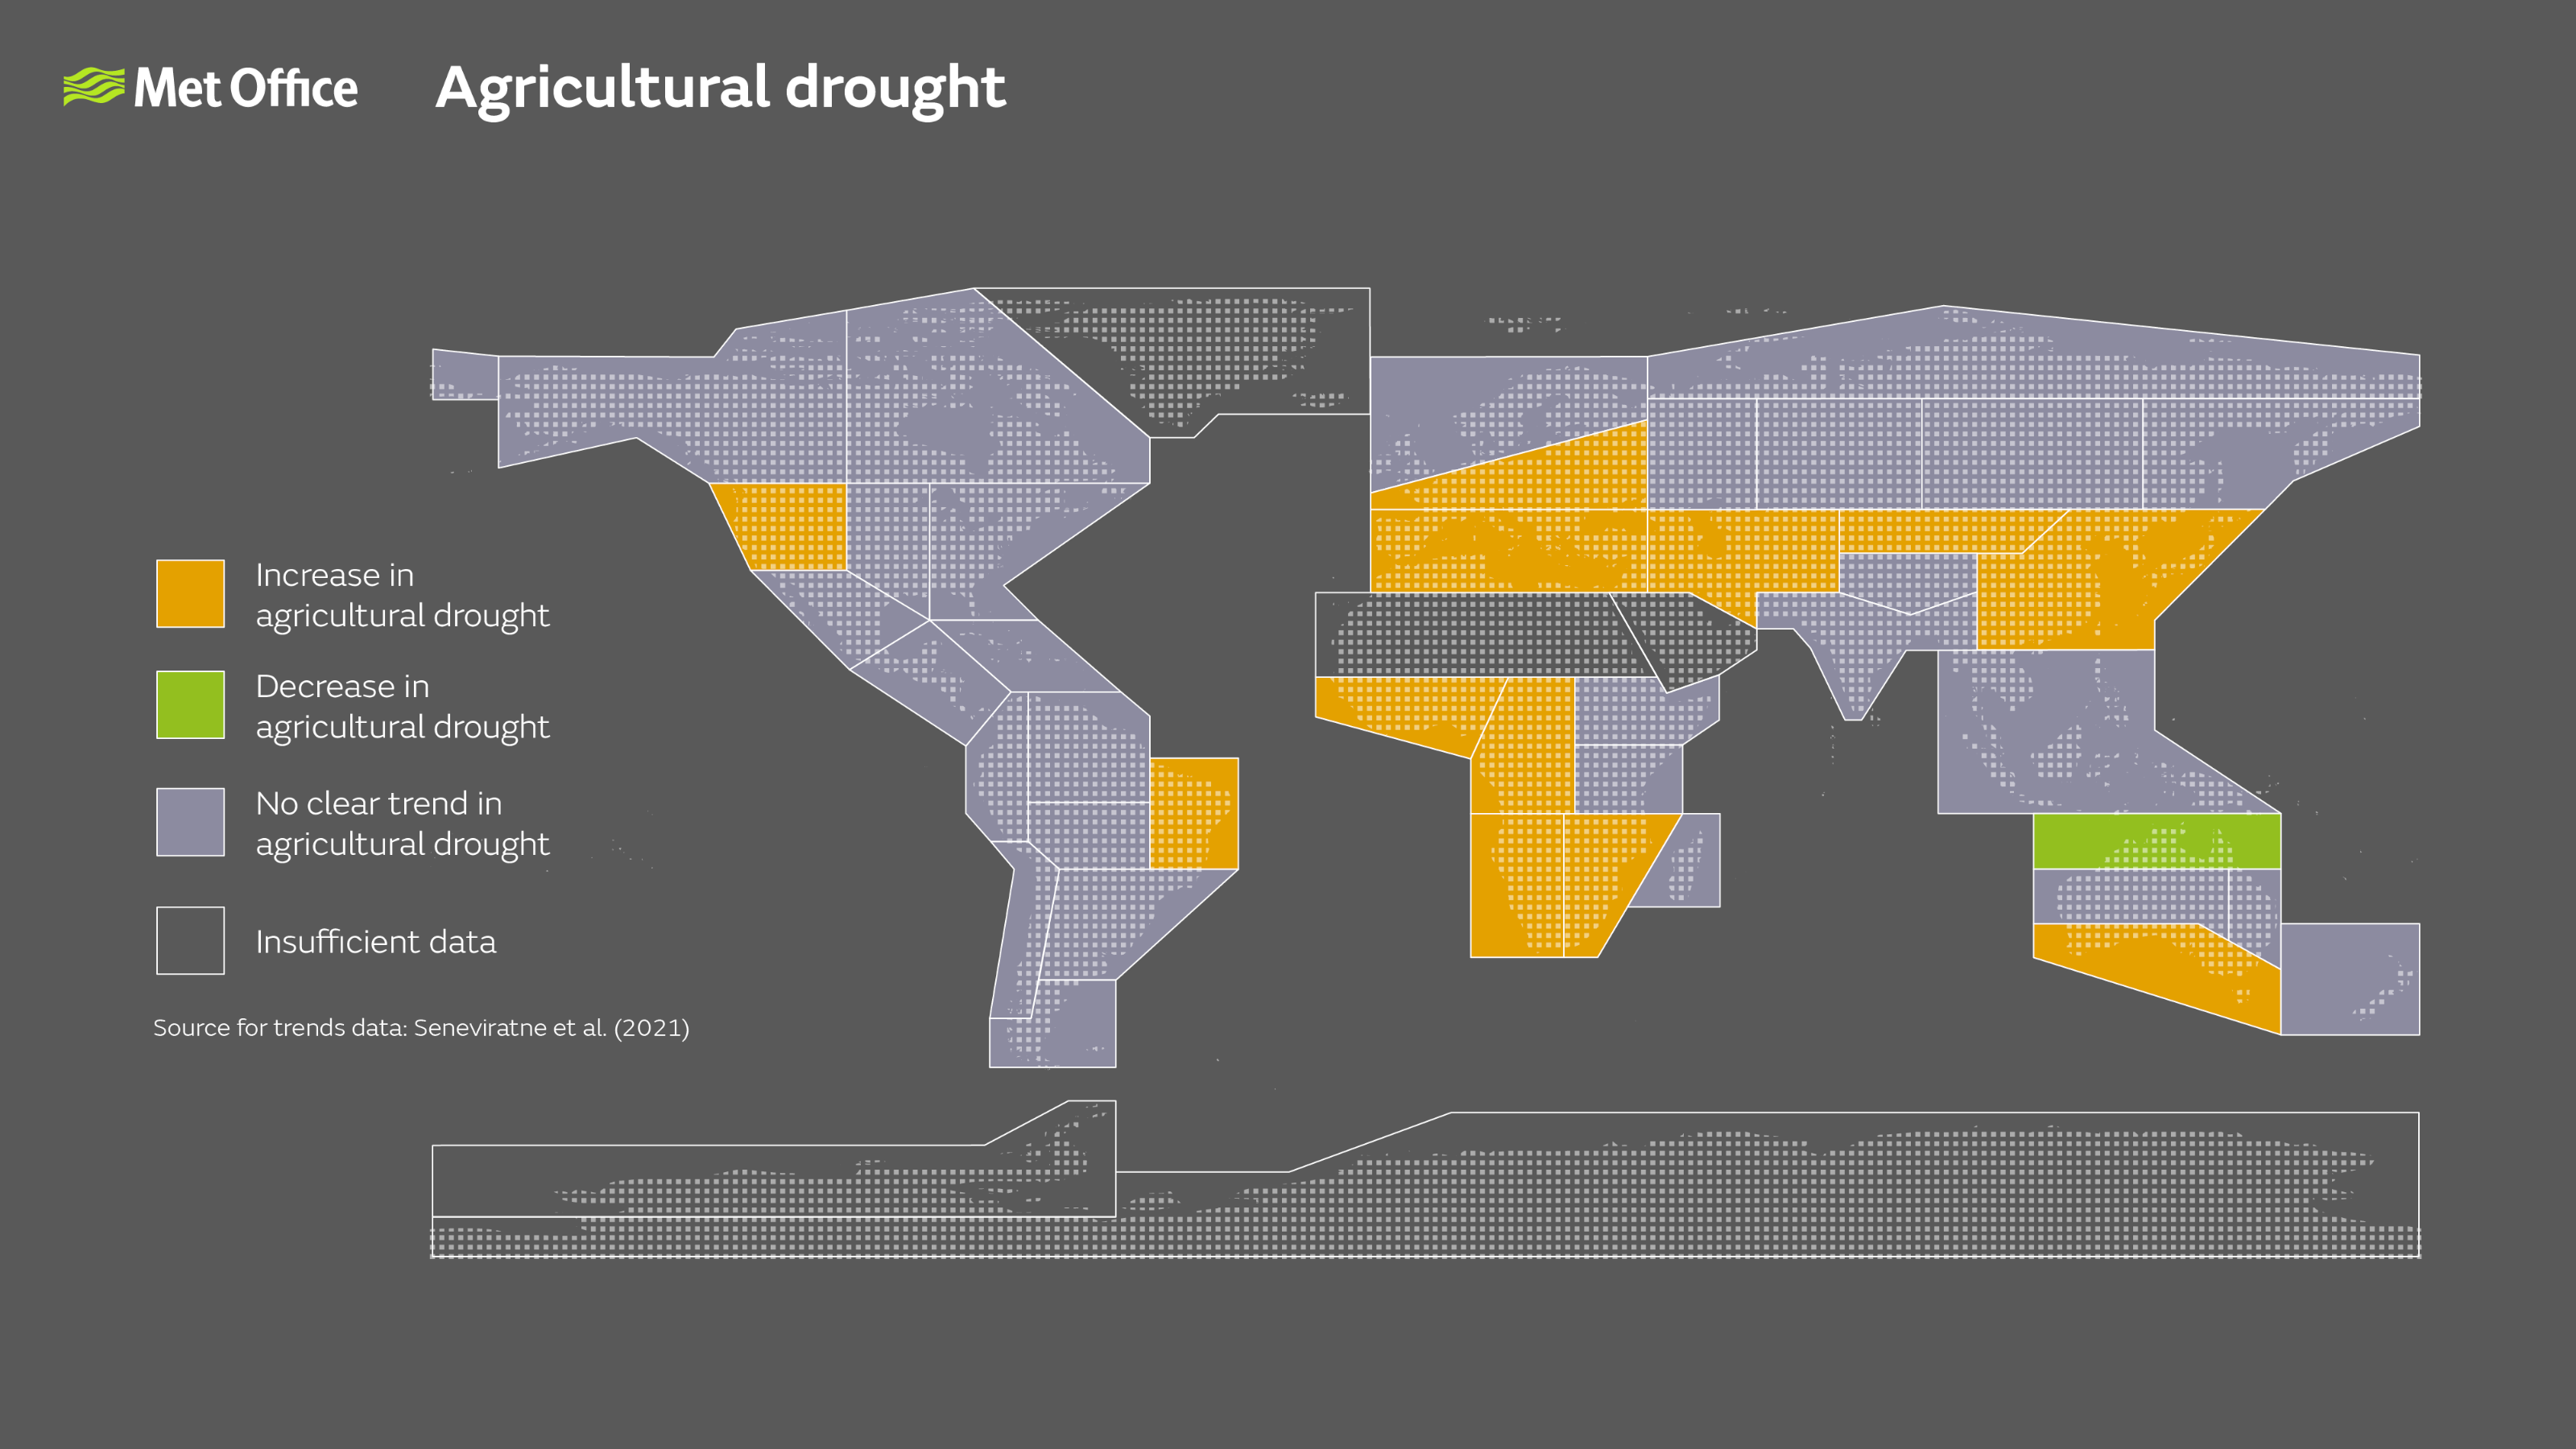 Global map showing observed changes in agricultural (soil moisture) drought since the 1950s, and examples of major drought events with severity / likelihood increased anthropogenic climate change. All inhabited continents have at least one region that is seeing an increase in agricultural drought. Northern Australia is the only region that shows a decrease in agricultural drought.